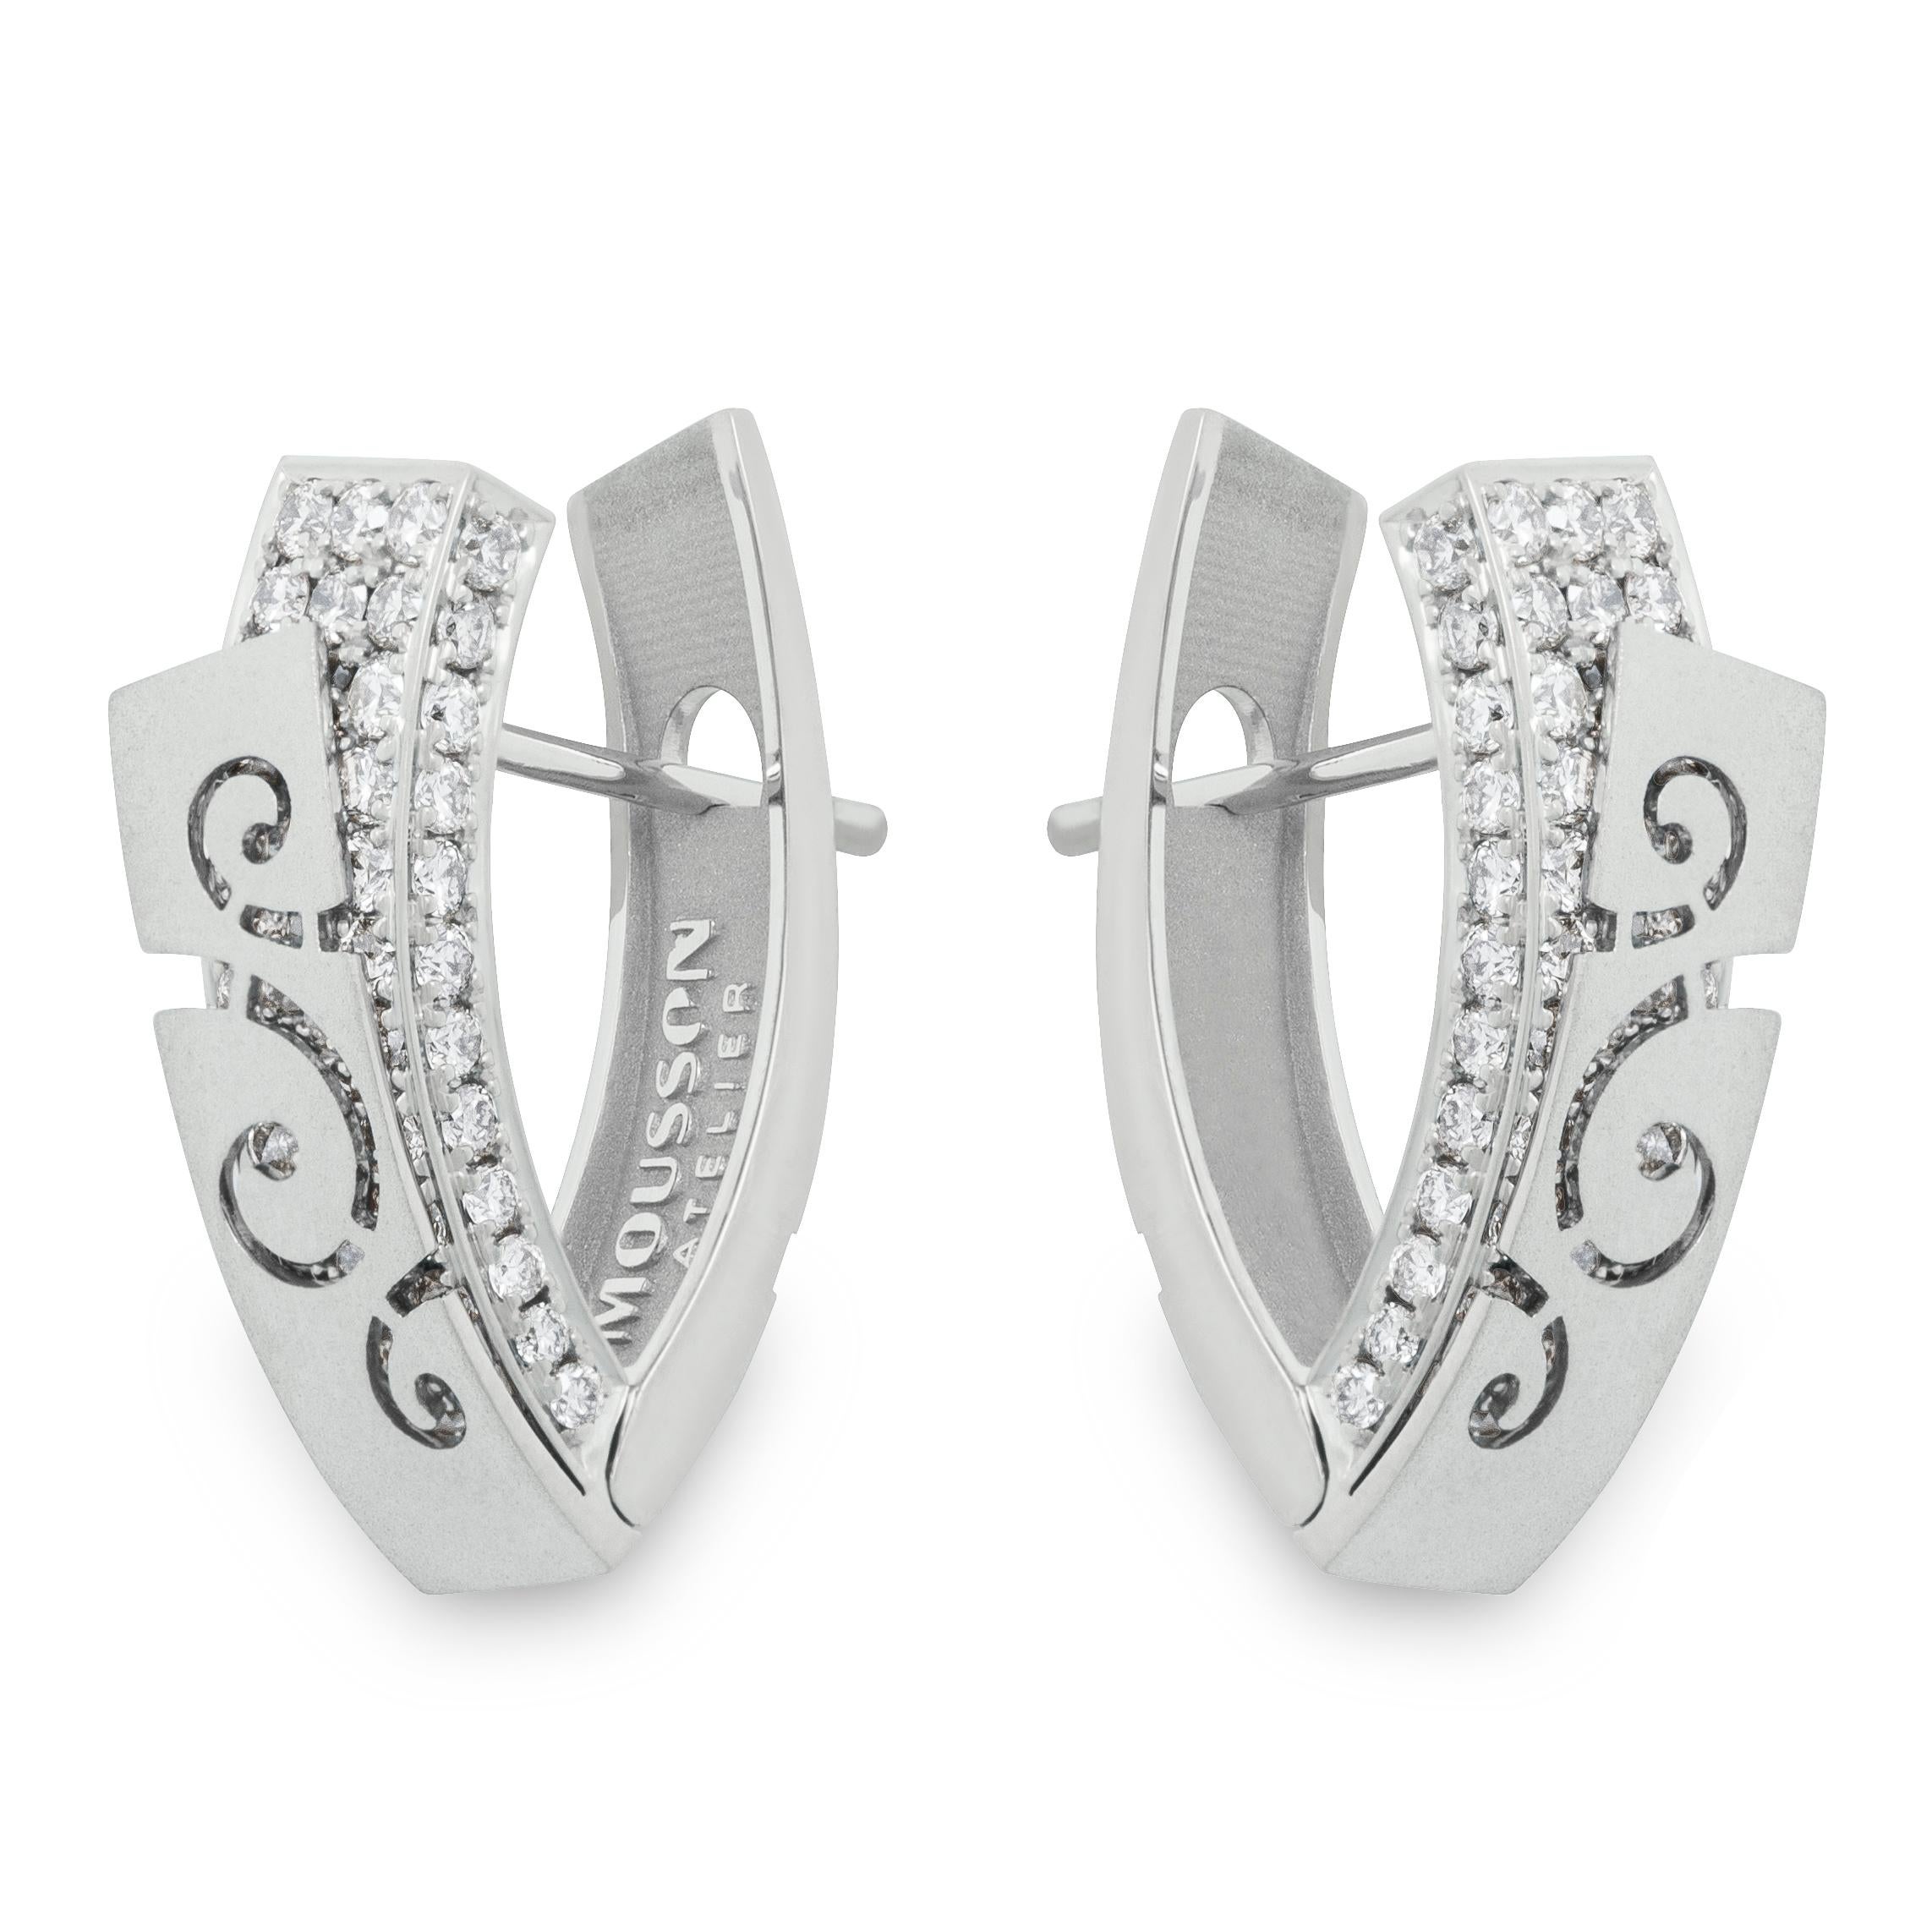 Diamonds 18 Karat White Gold Pret-a-Porter Earrings

Veil inspired this jewelry series by our designers. For example, these Earrings seem to have two layers. The first layer is a 